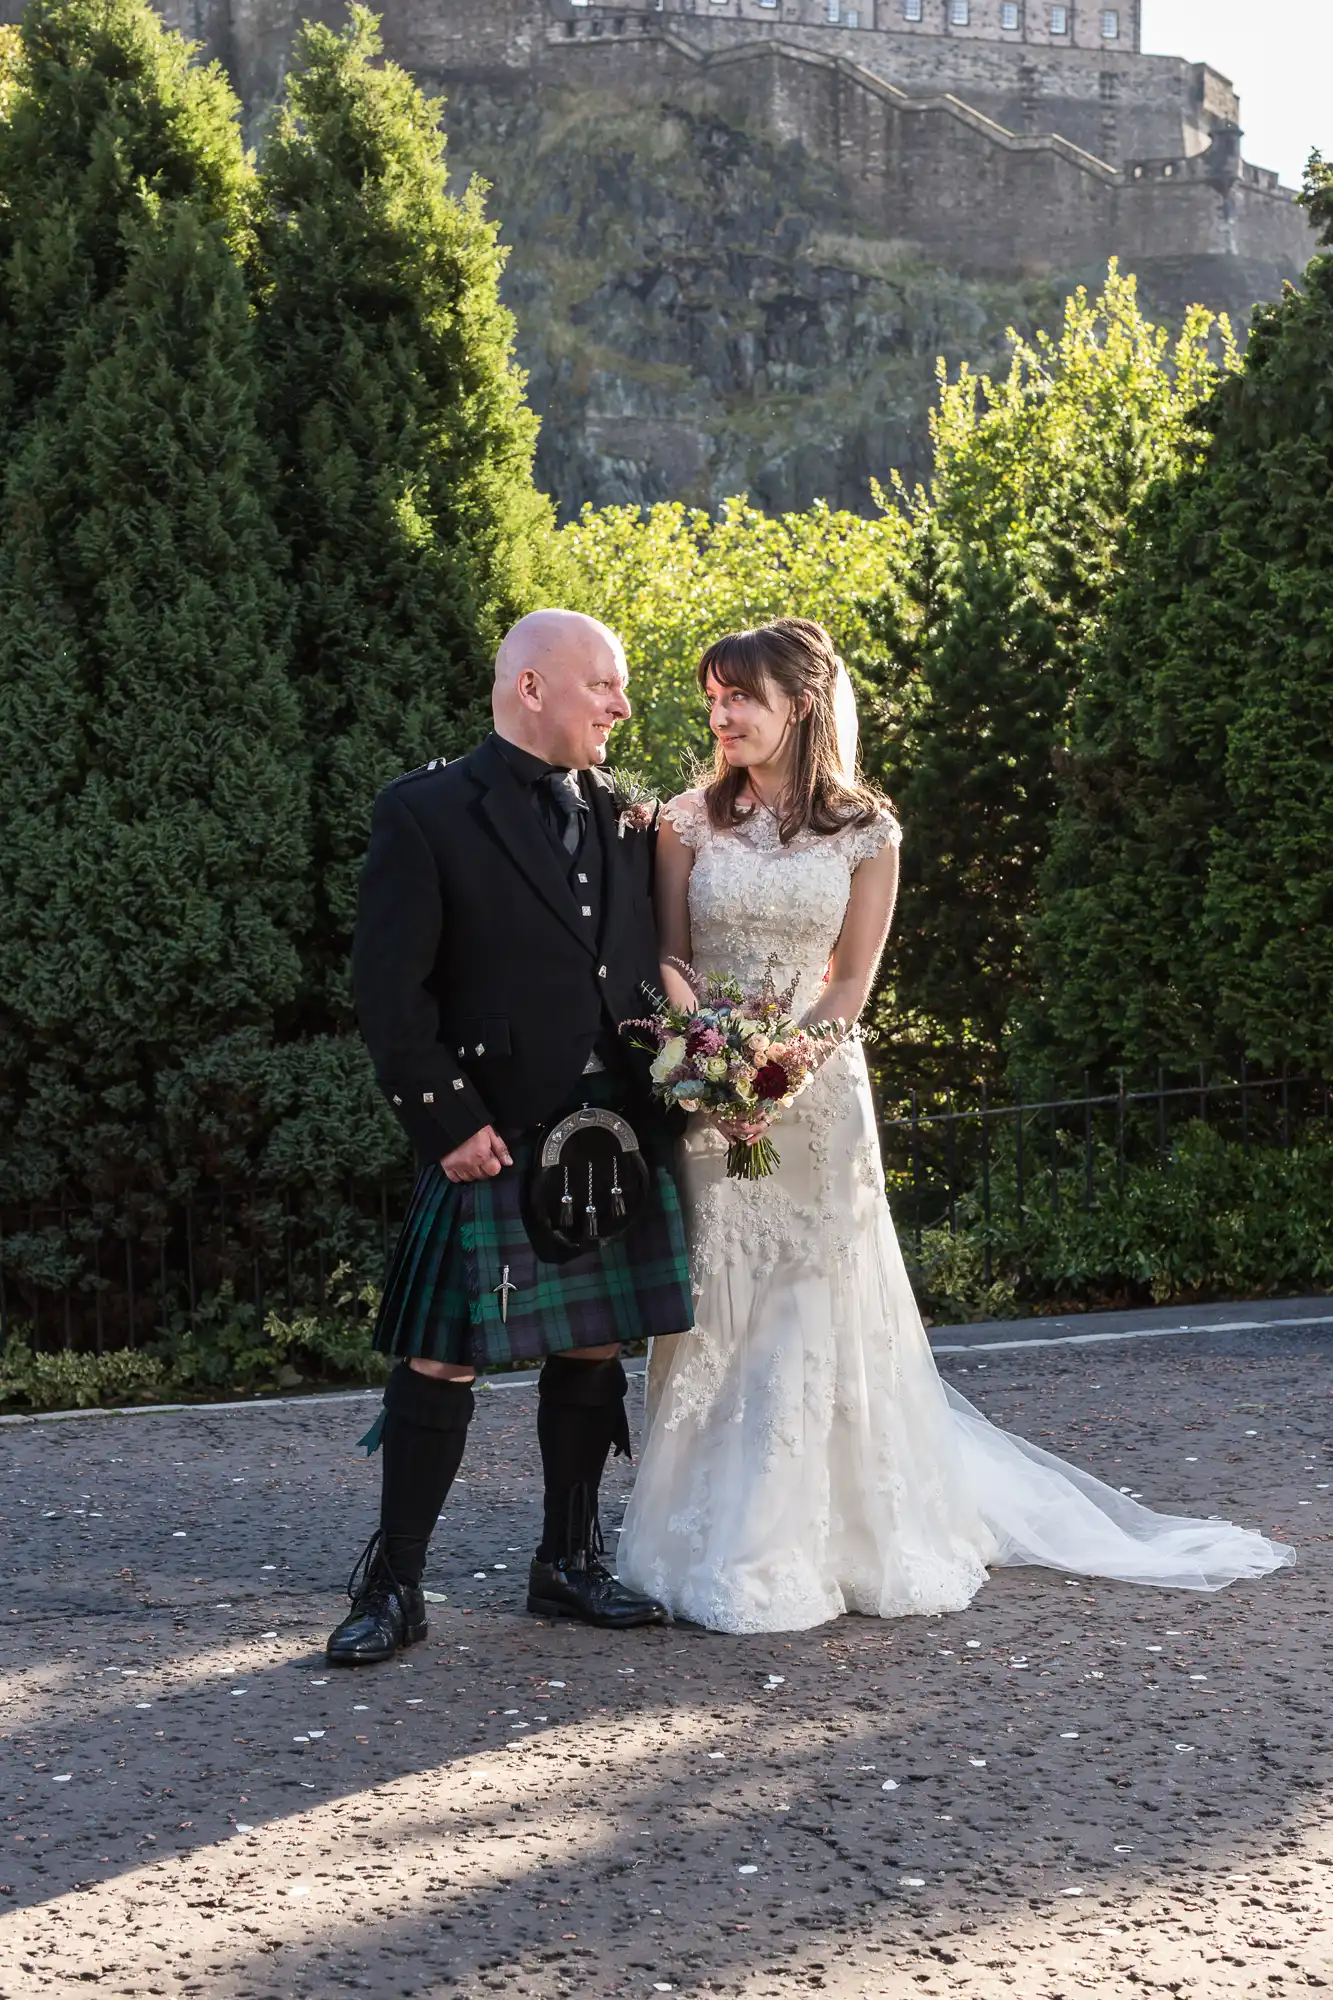 A bride in a white dress and a groom in a kilt stand smiling at each other, holding hands in a sunny park with a castle in the background.